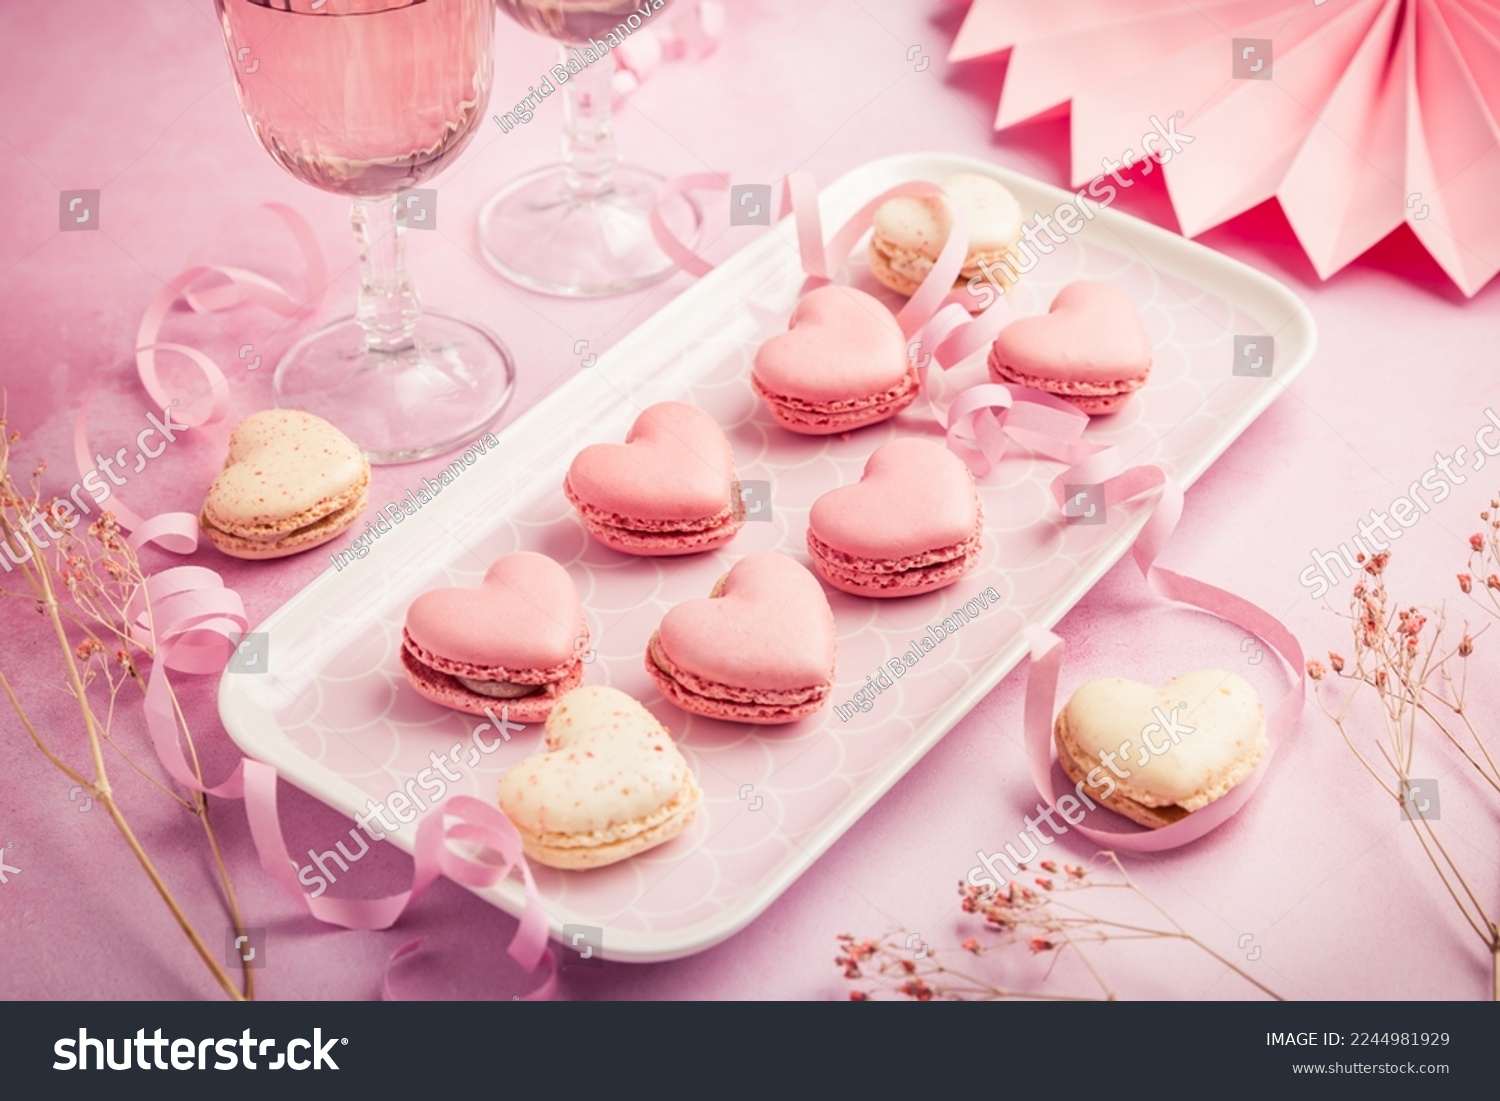 Happy Mothers Day, Happy Valentine - sweet macarons in heart shape and glasses of rose sparkling wine in pink tone #2244981929